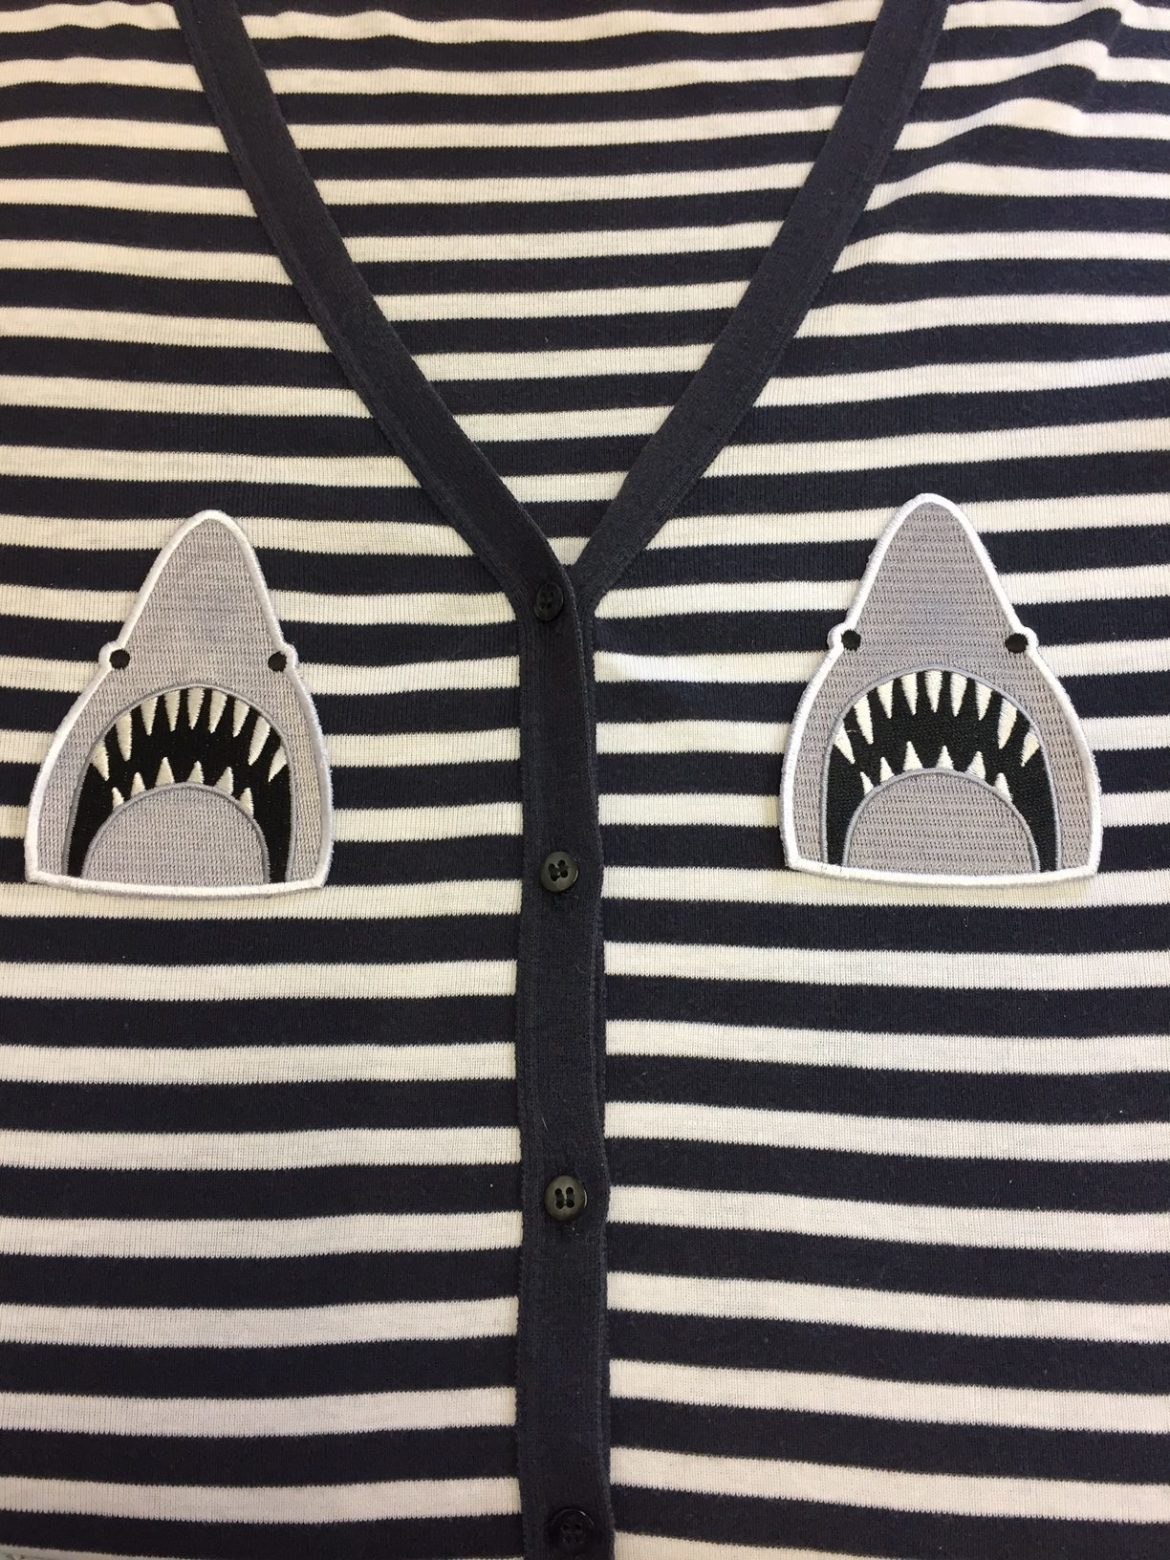 Jaws sew on patch.